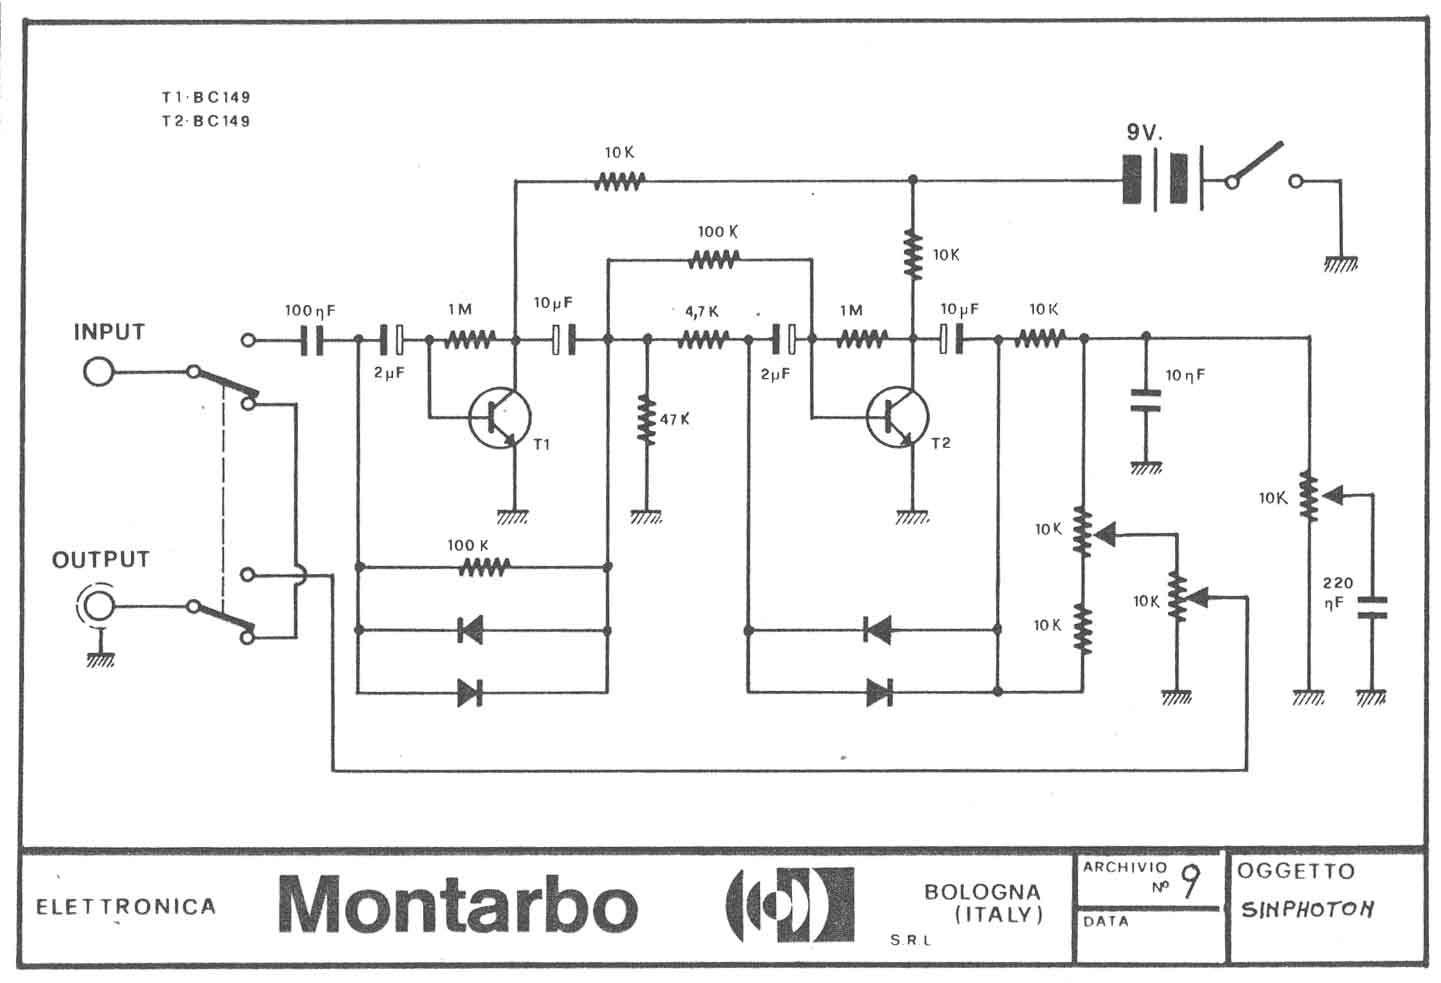 Guitar Effects - Vero - Point to Point - Tag Board Layouts: MONTARBO:  Sinphoton, Point to Point & Vero Layout